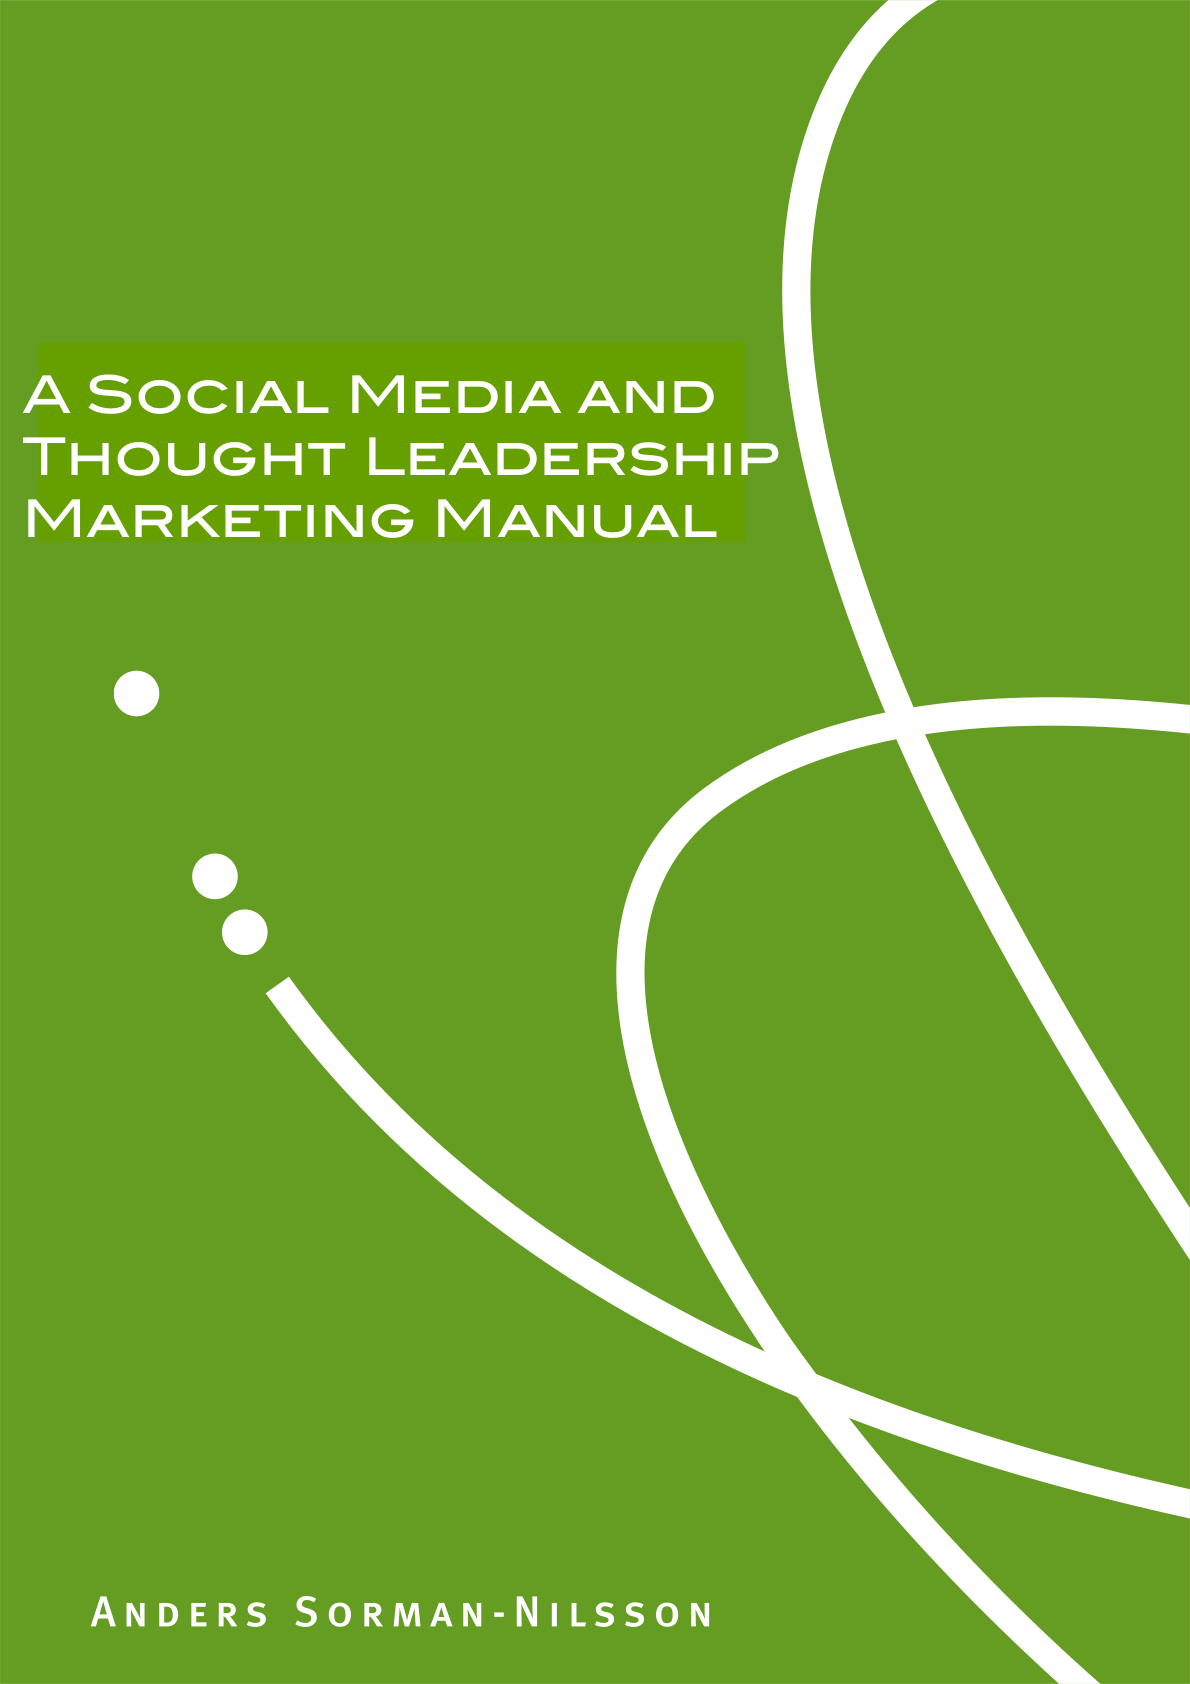 Your Digital FootPrint: what happens when social media meets thought leadership?